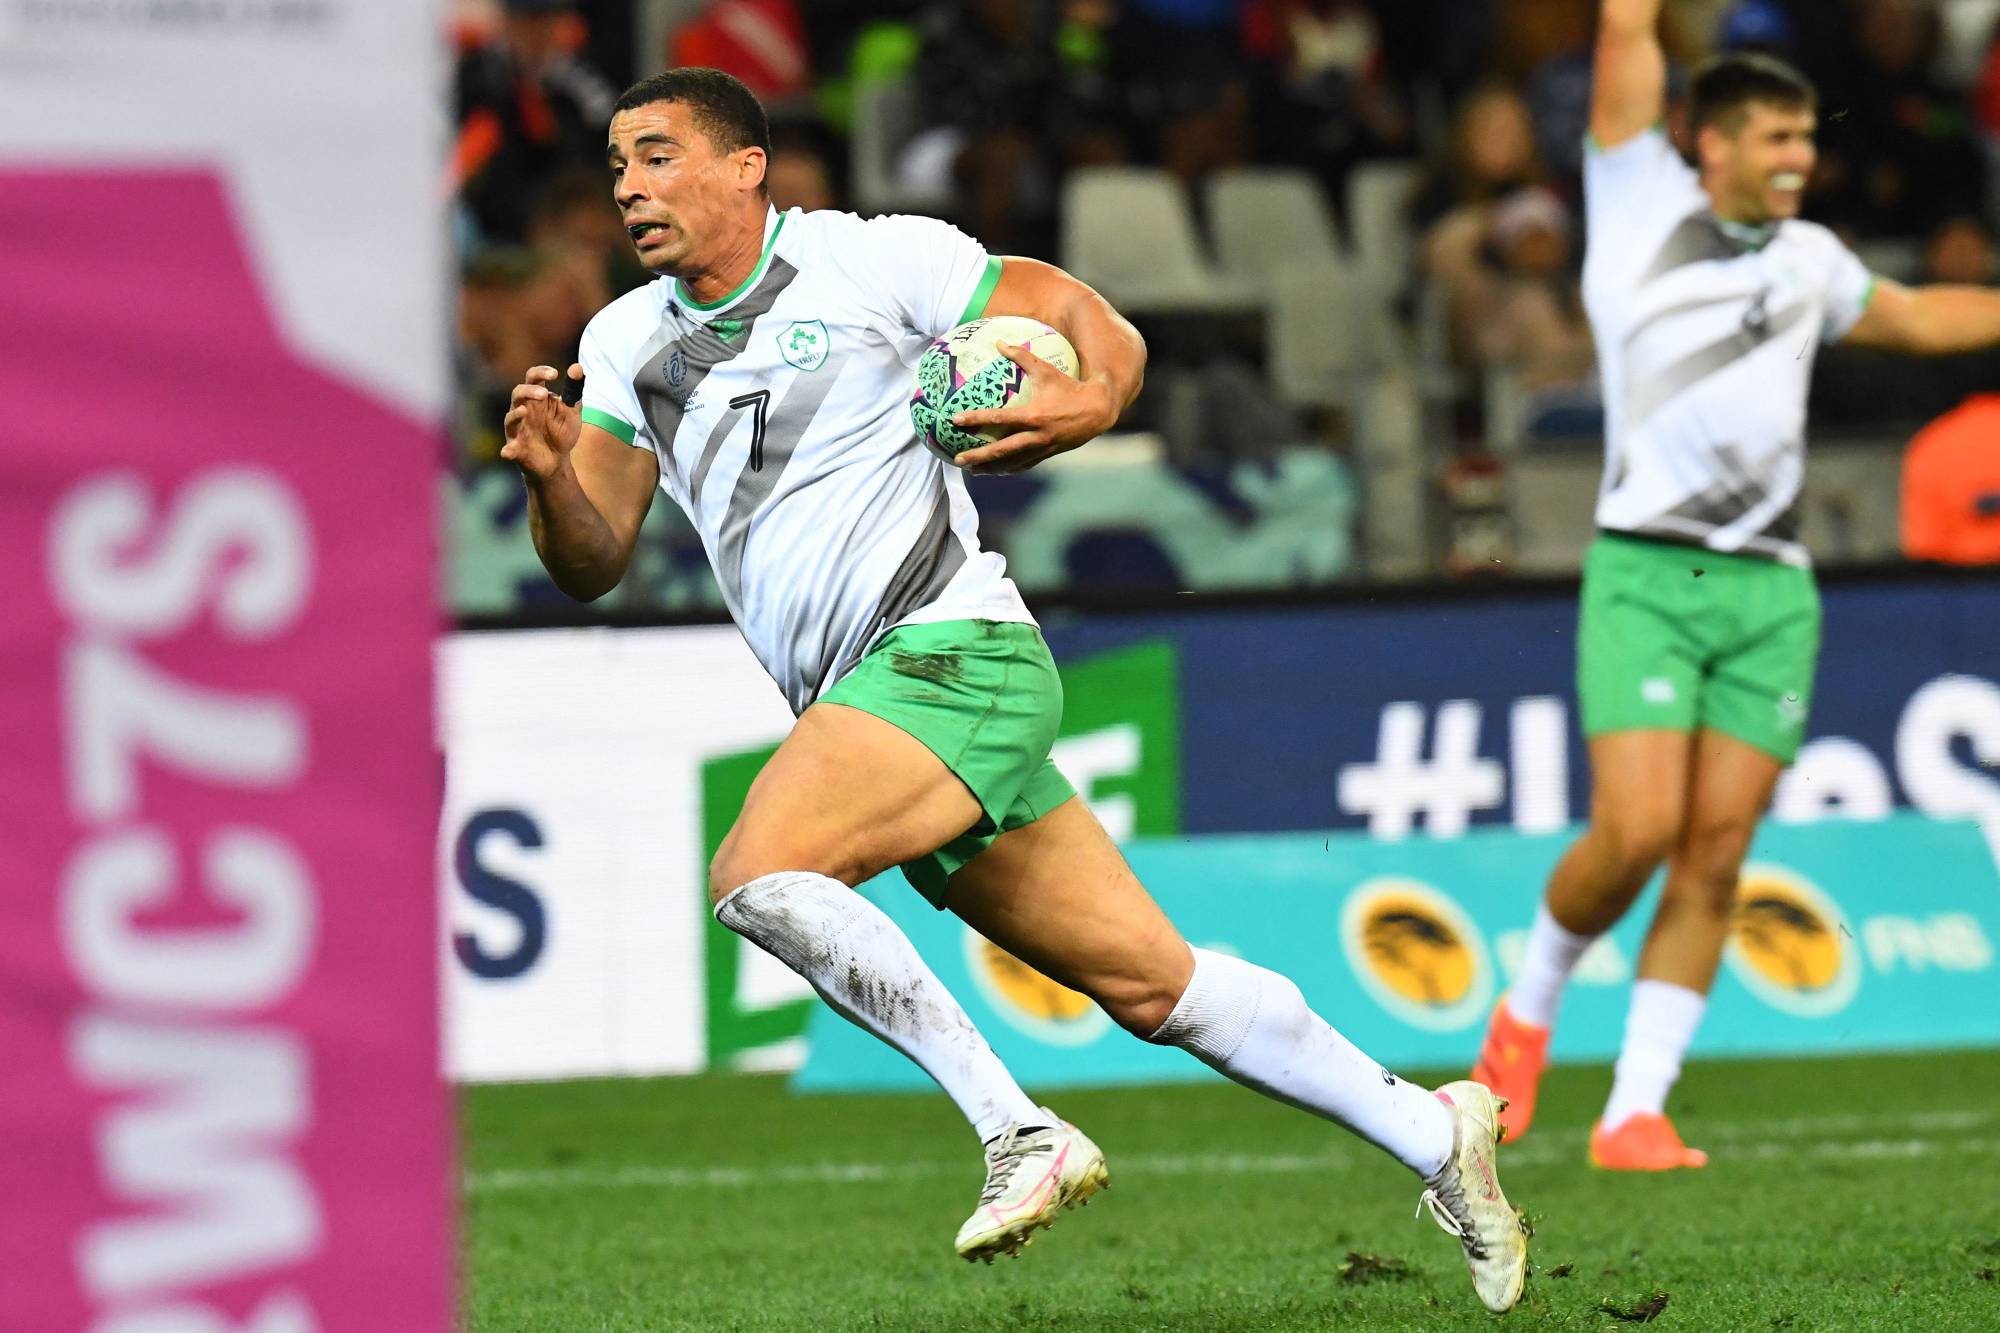 Ireland stun hosts South Africa at Rugby World Cup Sevens